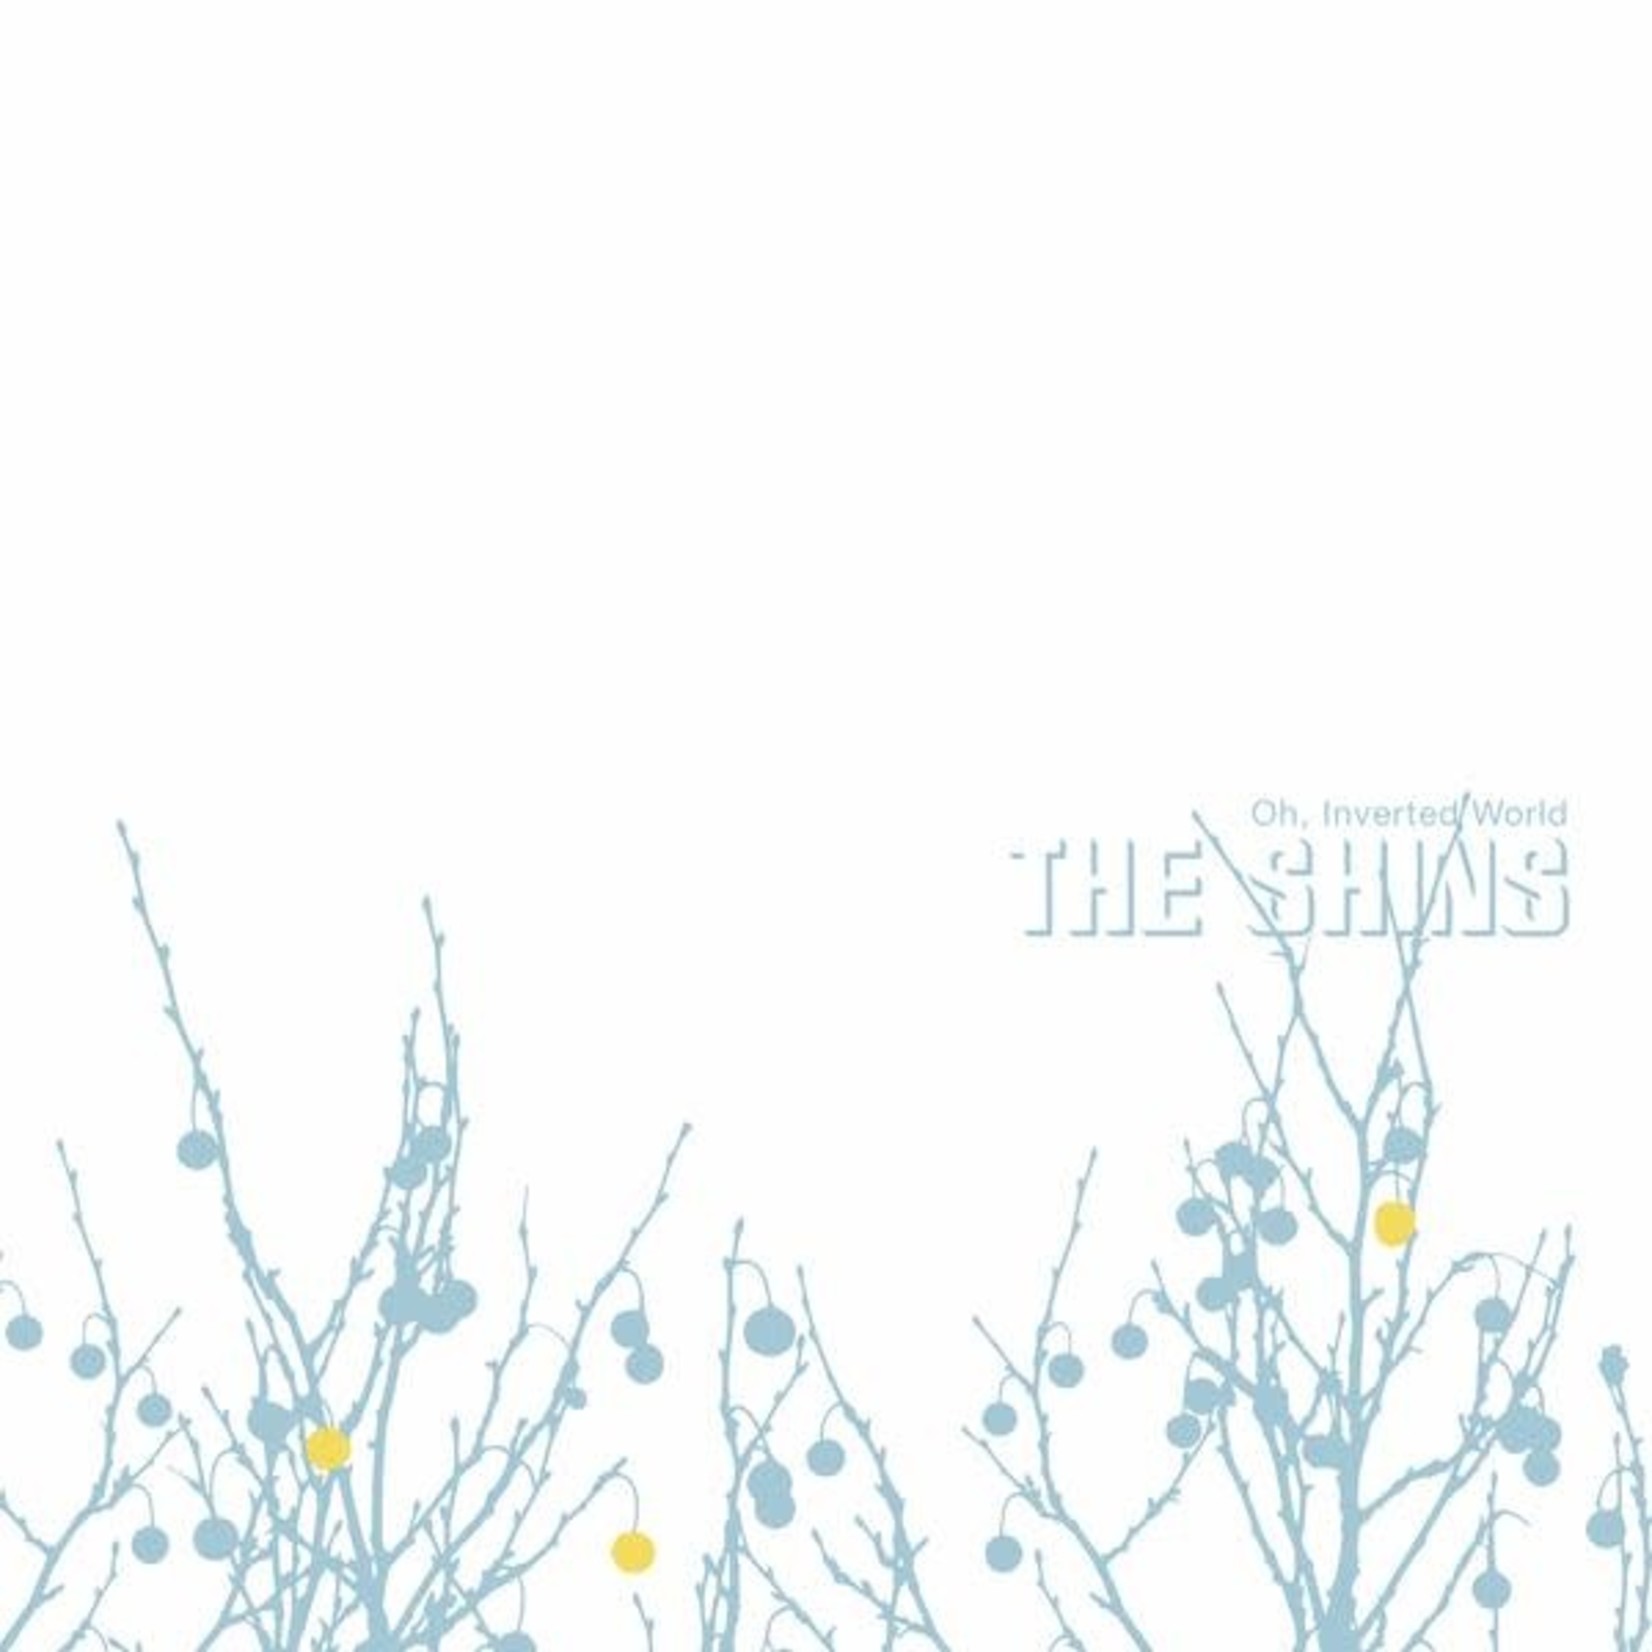 [New] Shins - Oh, Inverted World (20th anniversary remaster)